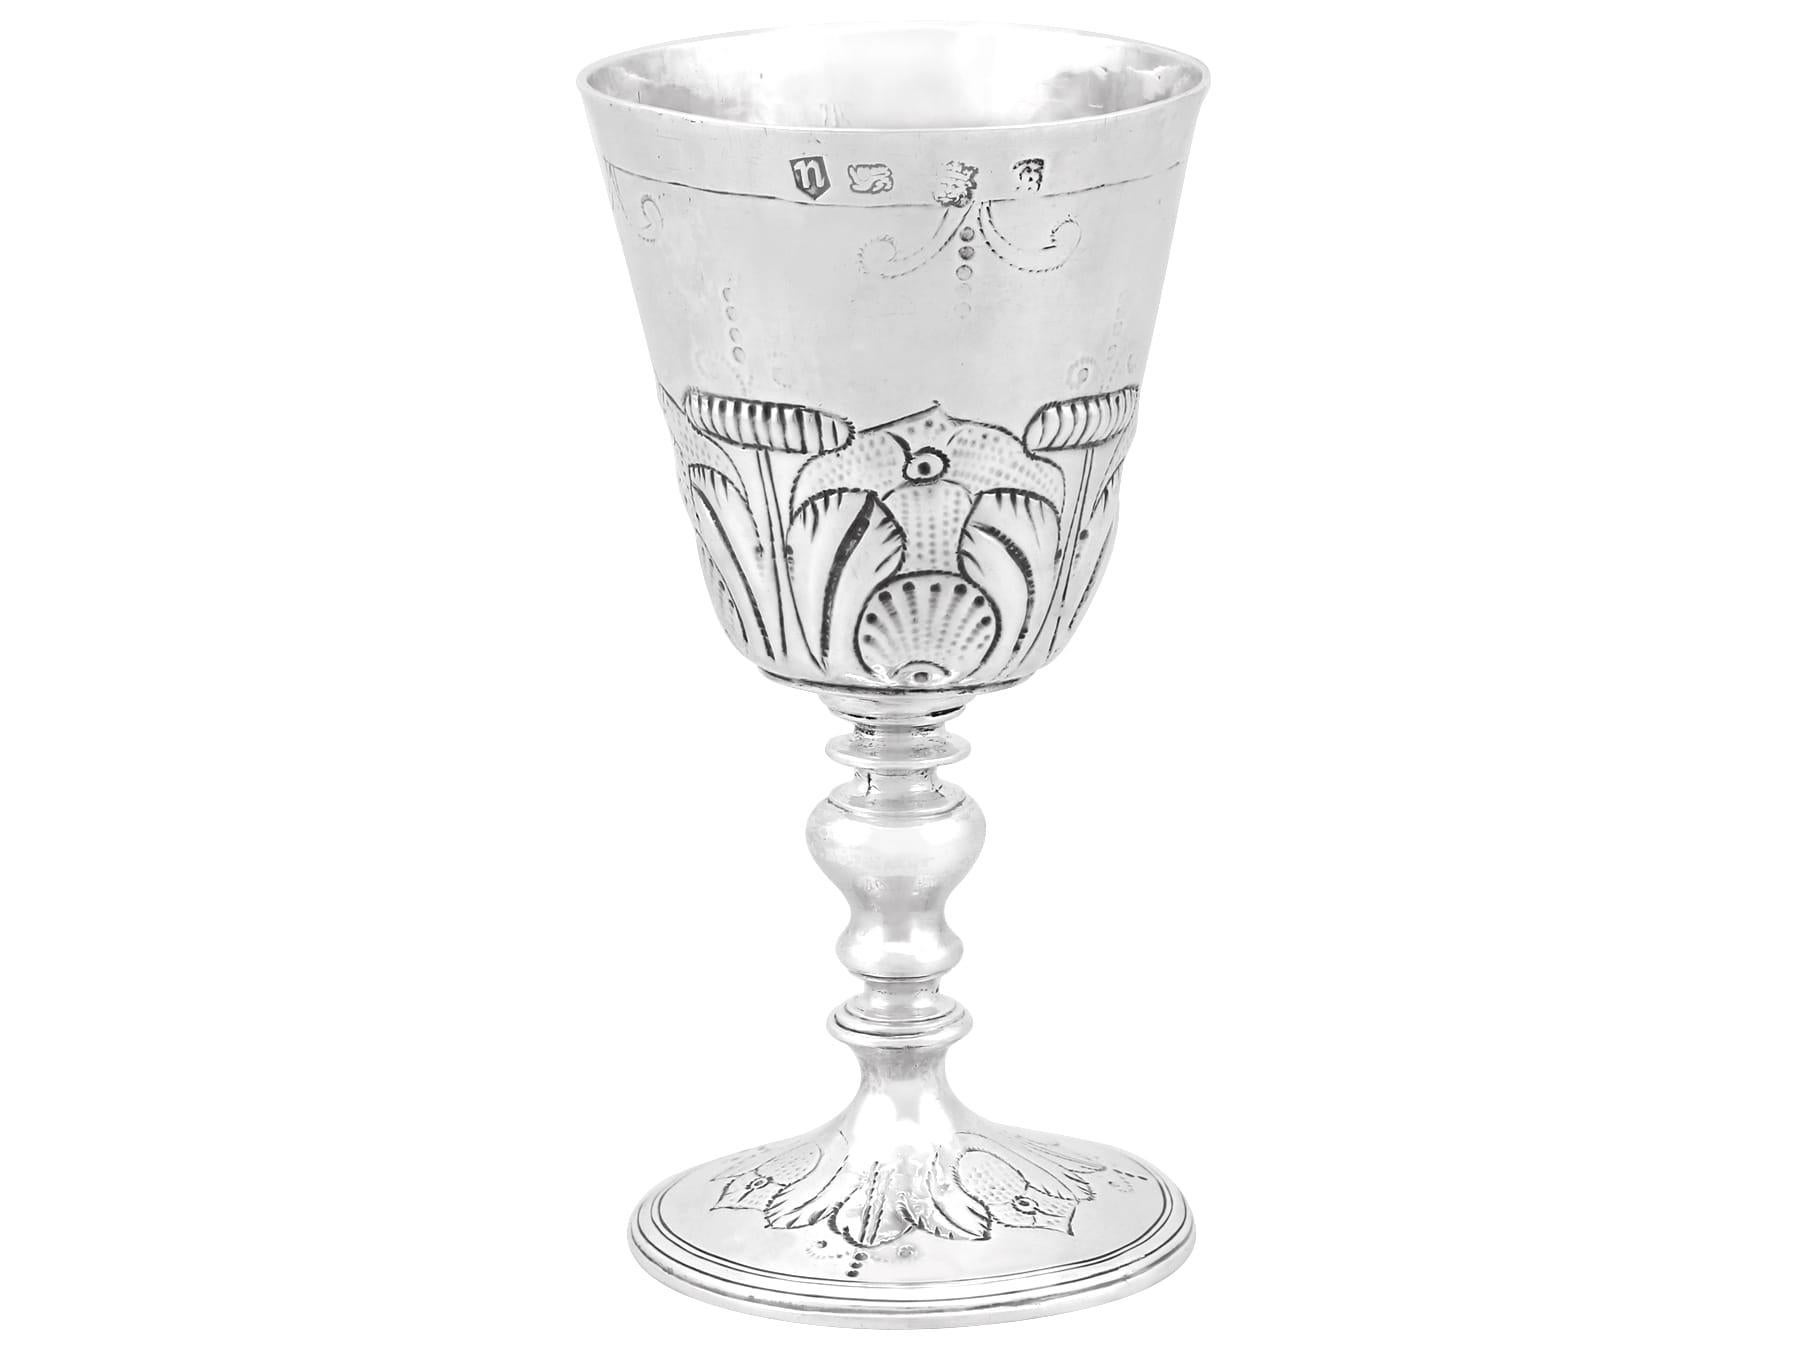 An exceptional, fine and impressive, rare antique Charles I English sterling silver goblet; an addition to our collectable range of 17th century silverware.

This exceptional antique Charles I sterling silver goblet / wine cup has a tapering